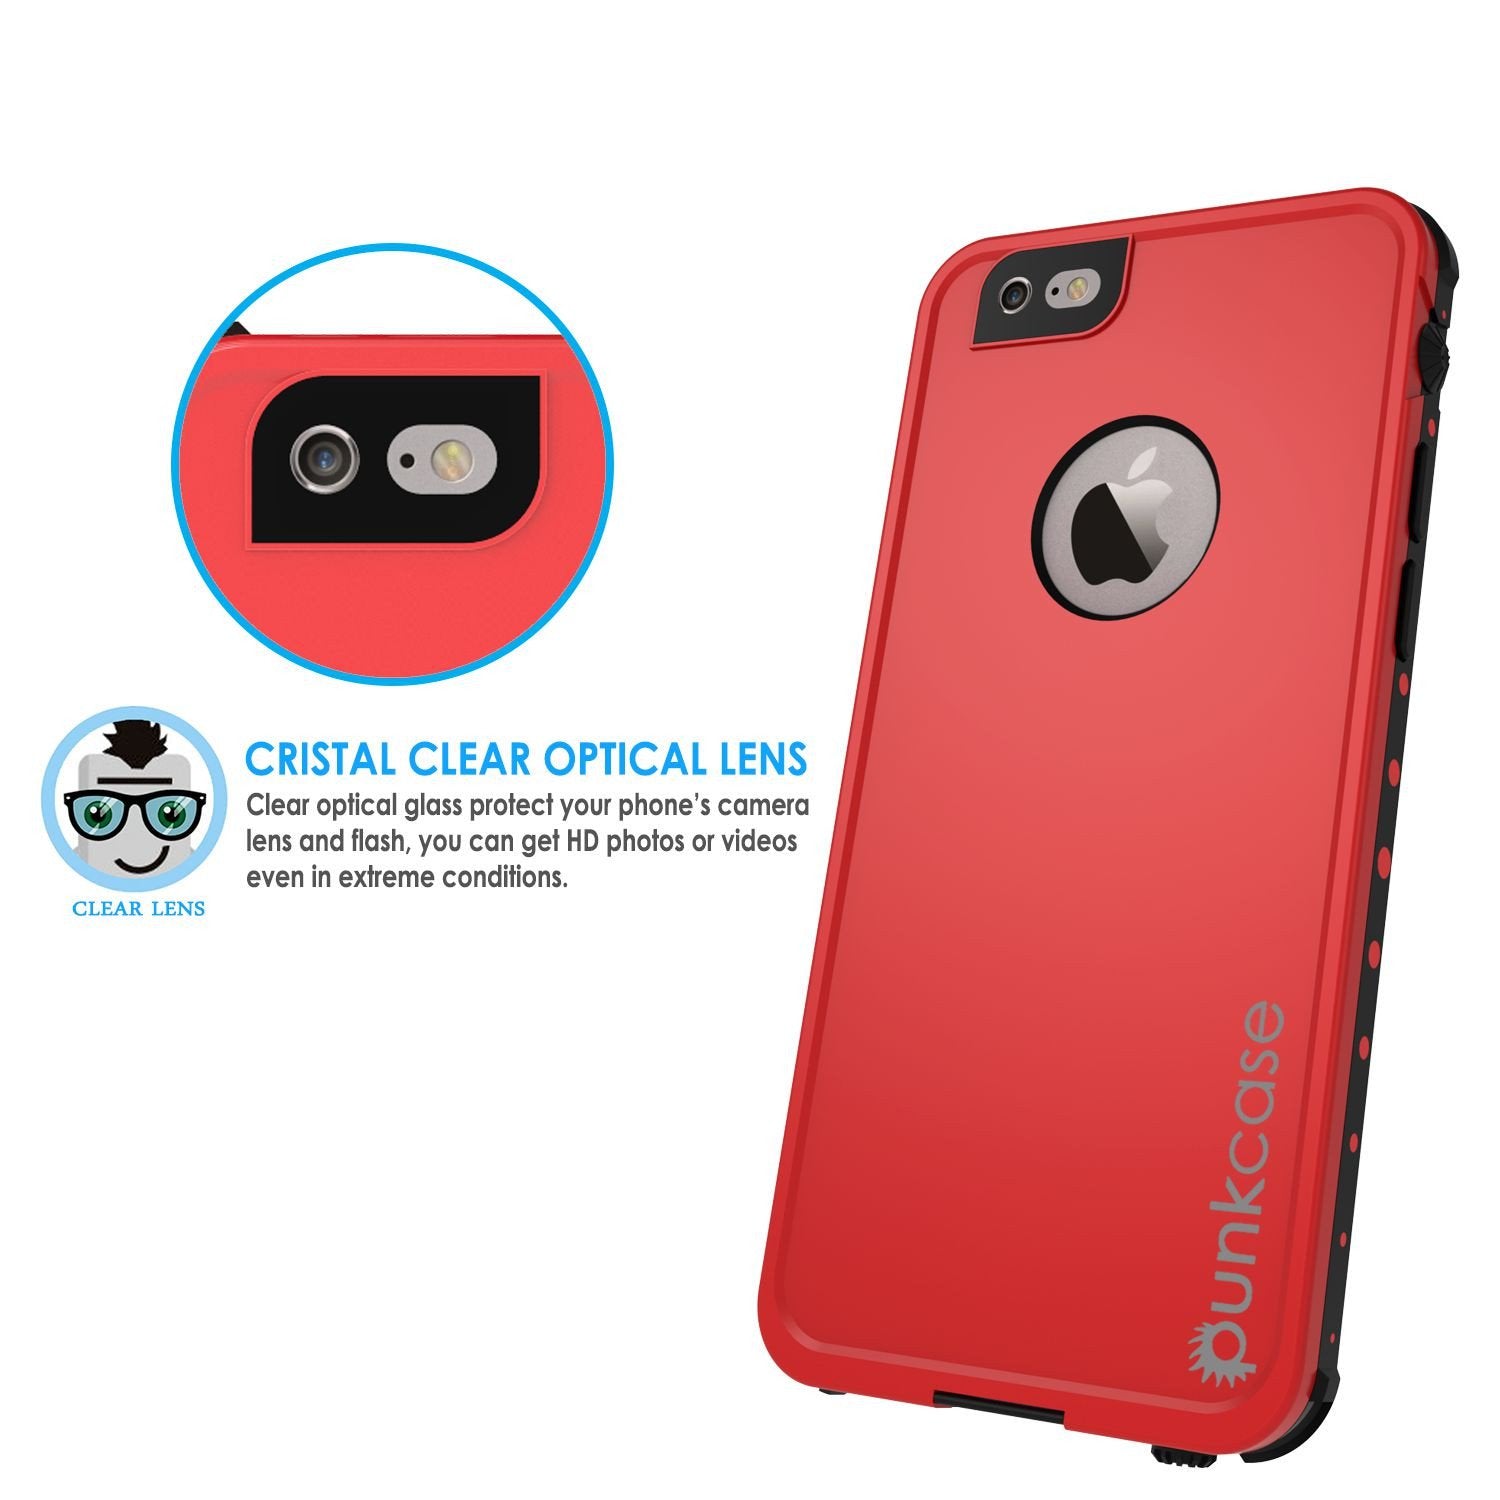 iPhone 6S+/6+ Plus Waterproof Case, PUNKcase StudStar Red w/ Attached Screen Protector | Warranty